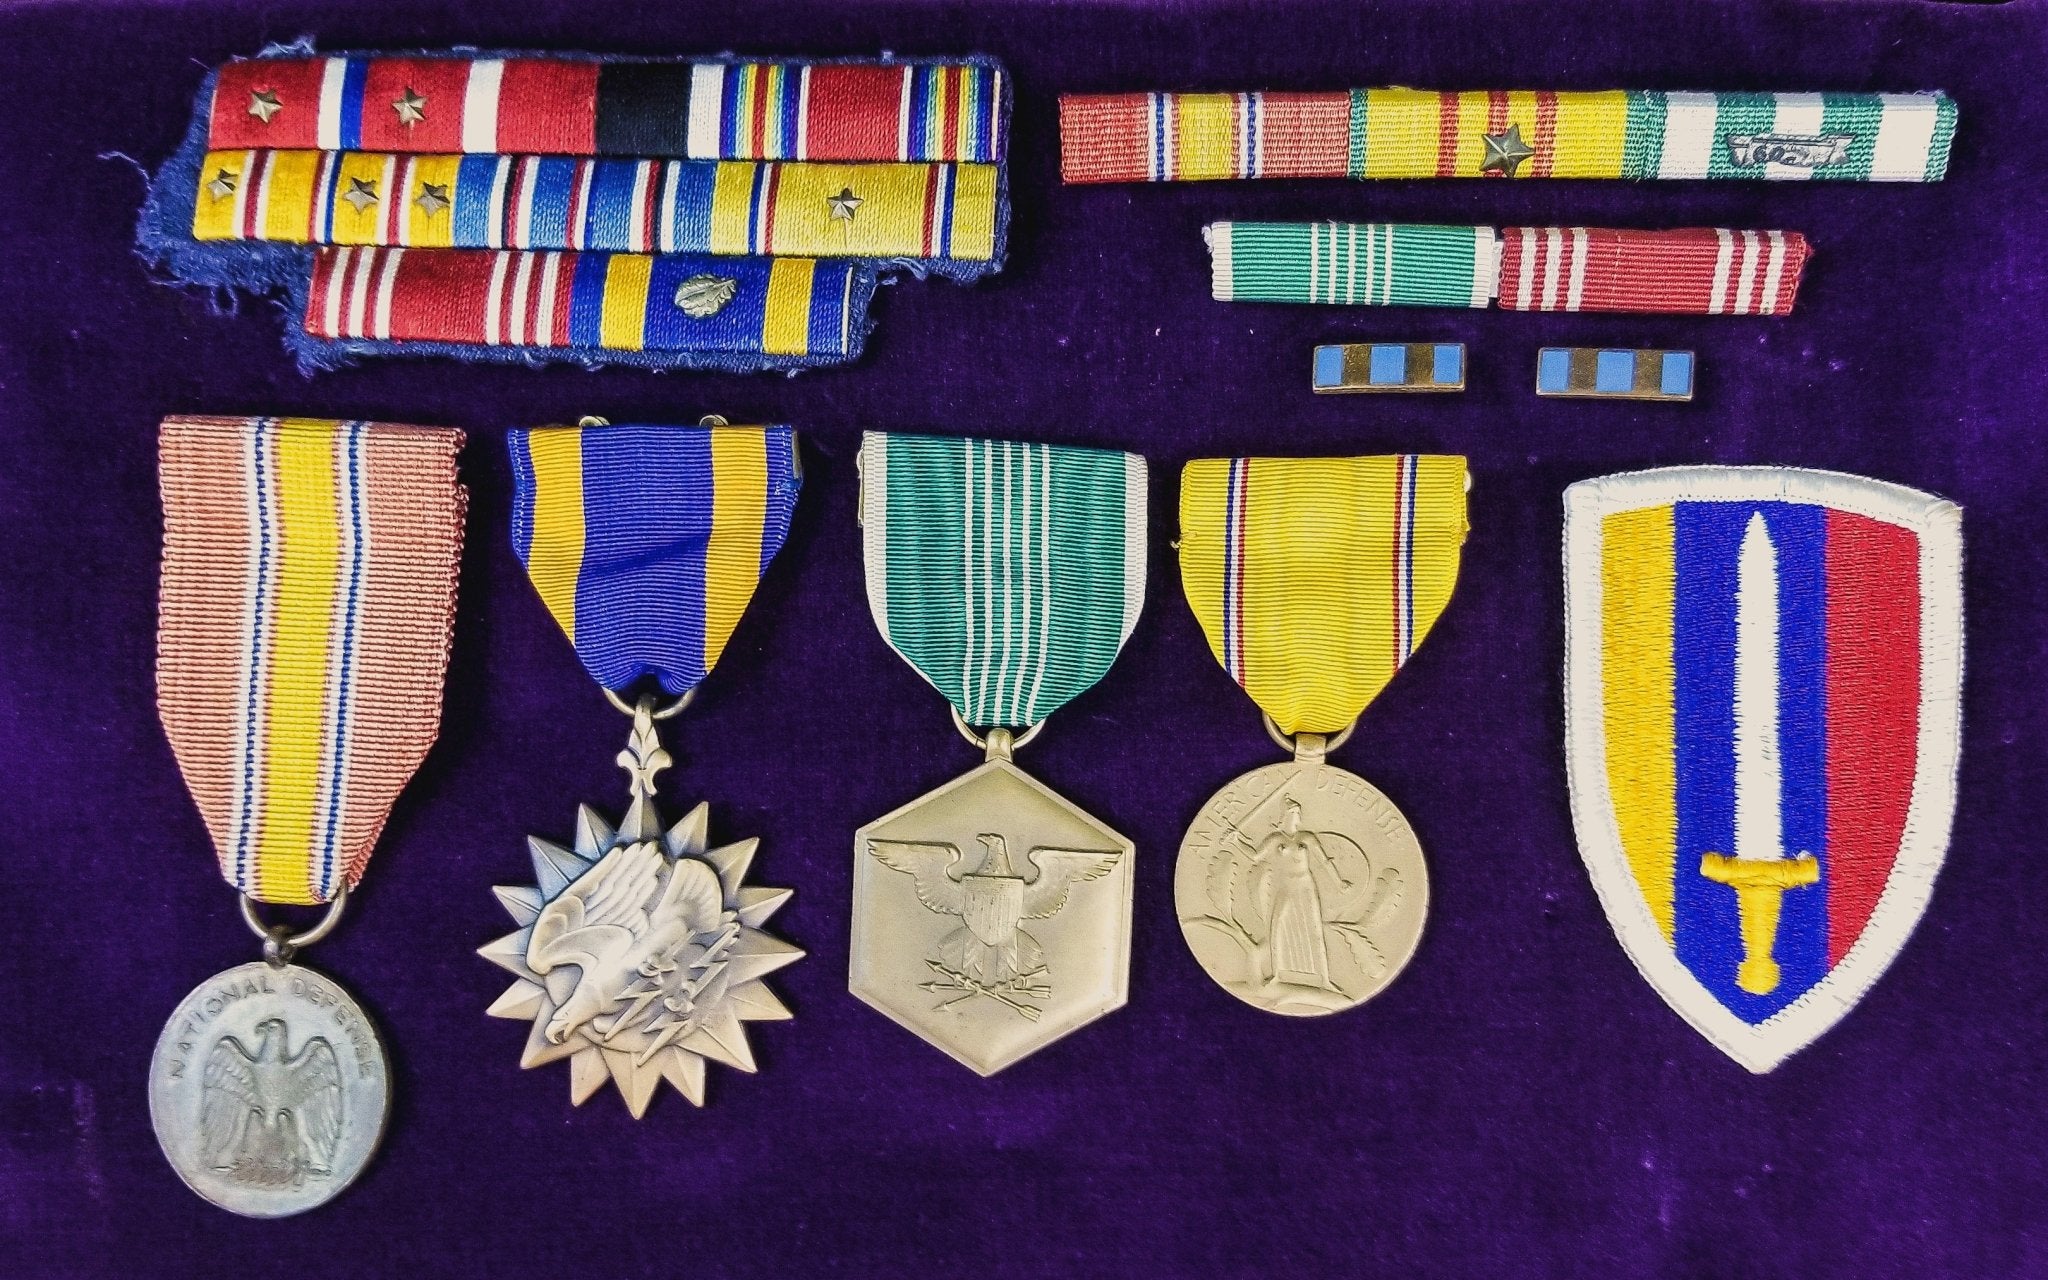 Detecting Real from Fakes in Military Medals